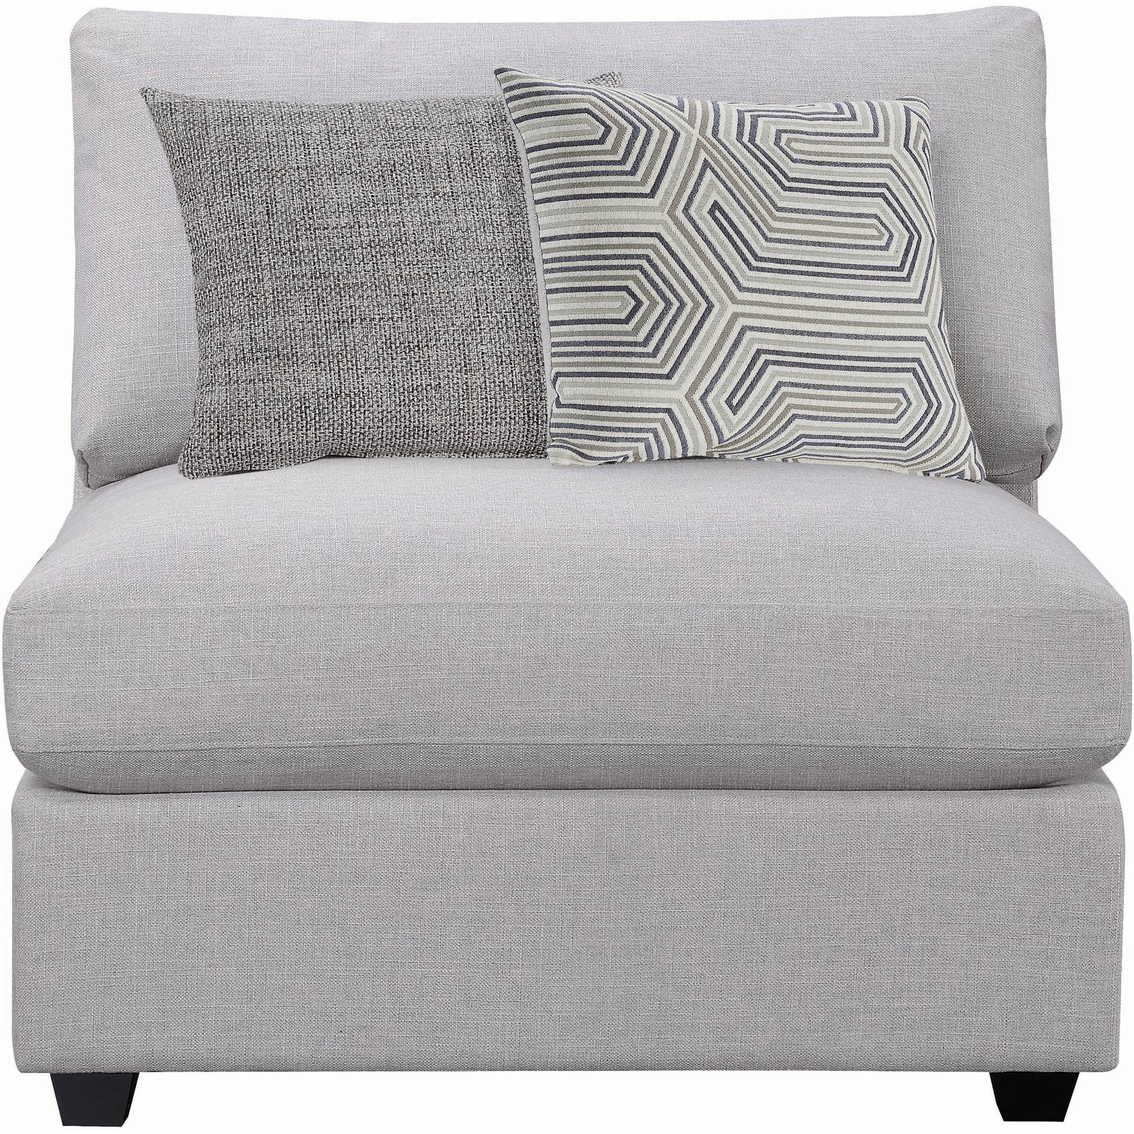 Coaster Charlotte Modern Sectional Armless Chair - Image 2 of 4